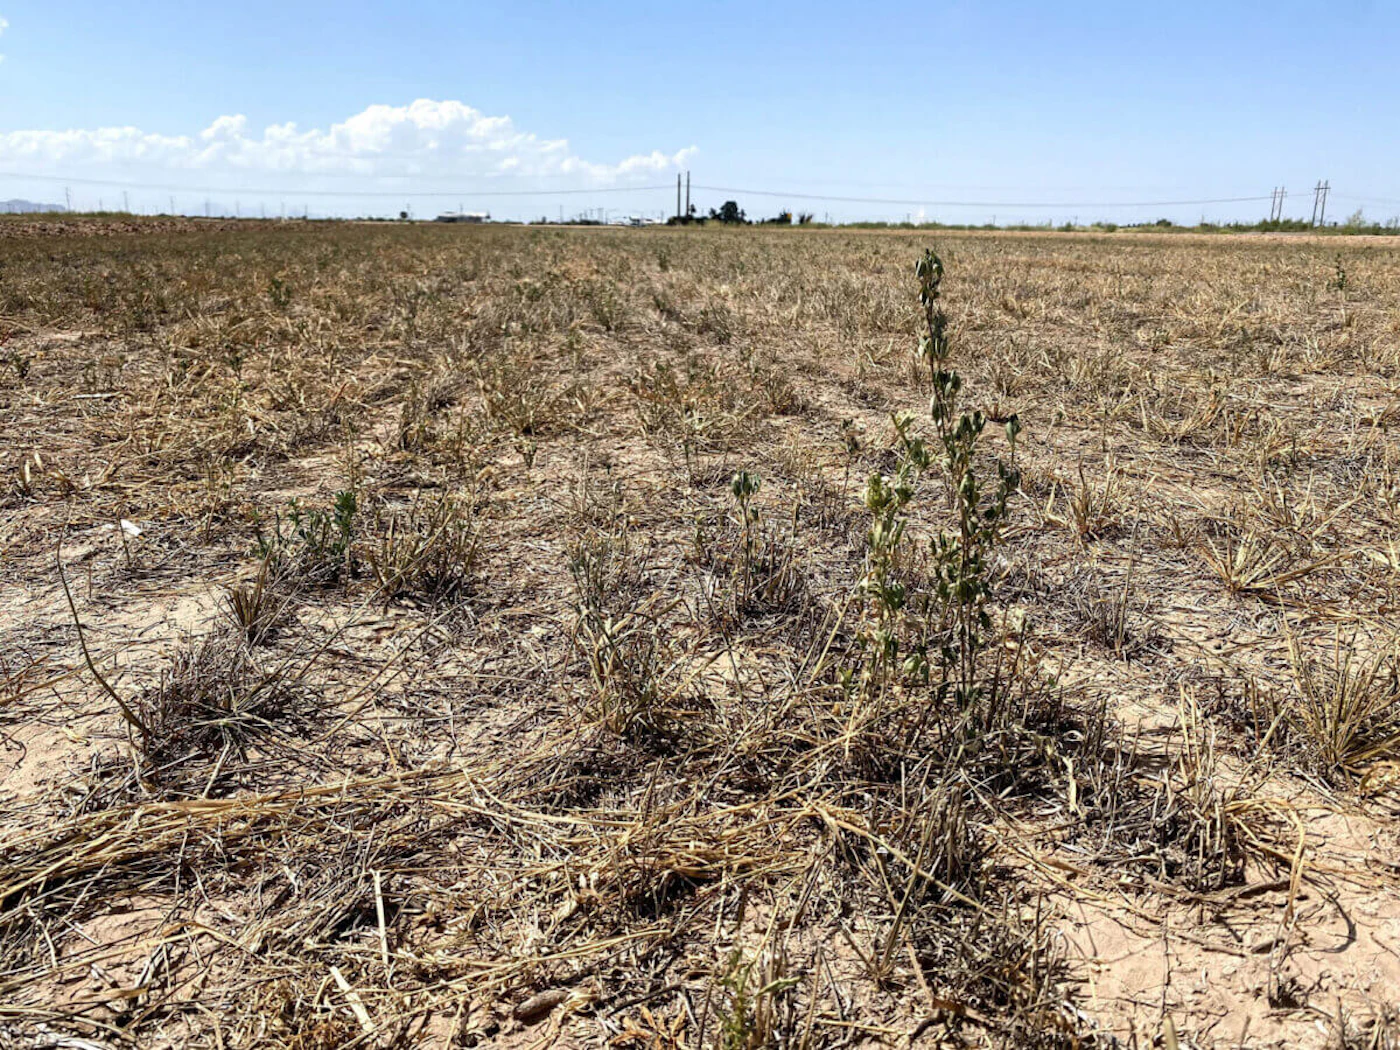 A single surviving stalk of alfalfa sticks out of a field at Caywoods Farm east of Casa Grande in this October 2021 file photo. The spring outlook from the National Oceanic and Atmospheric Administration calls for more drought conditions in Arizona, and in much of the nation. (File photo by Emma VandenEinde/Cronkite News)